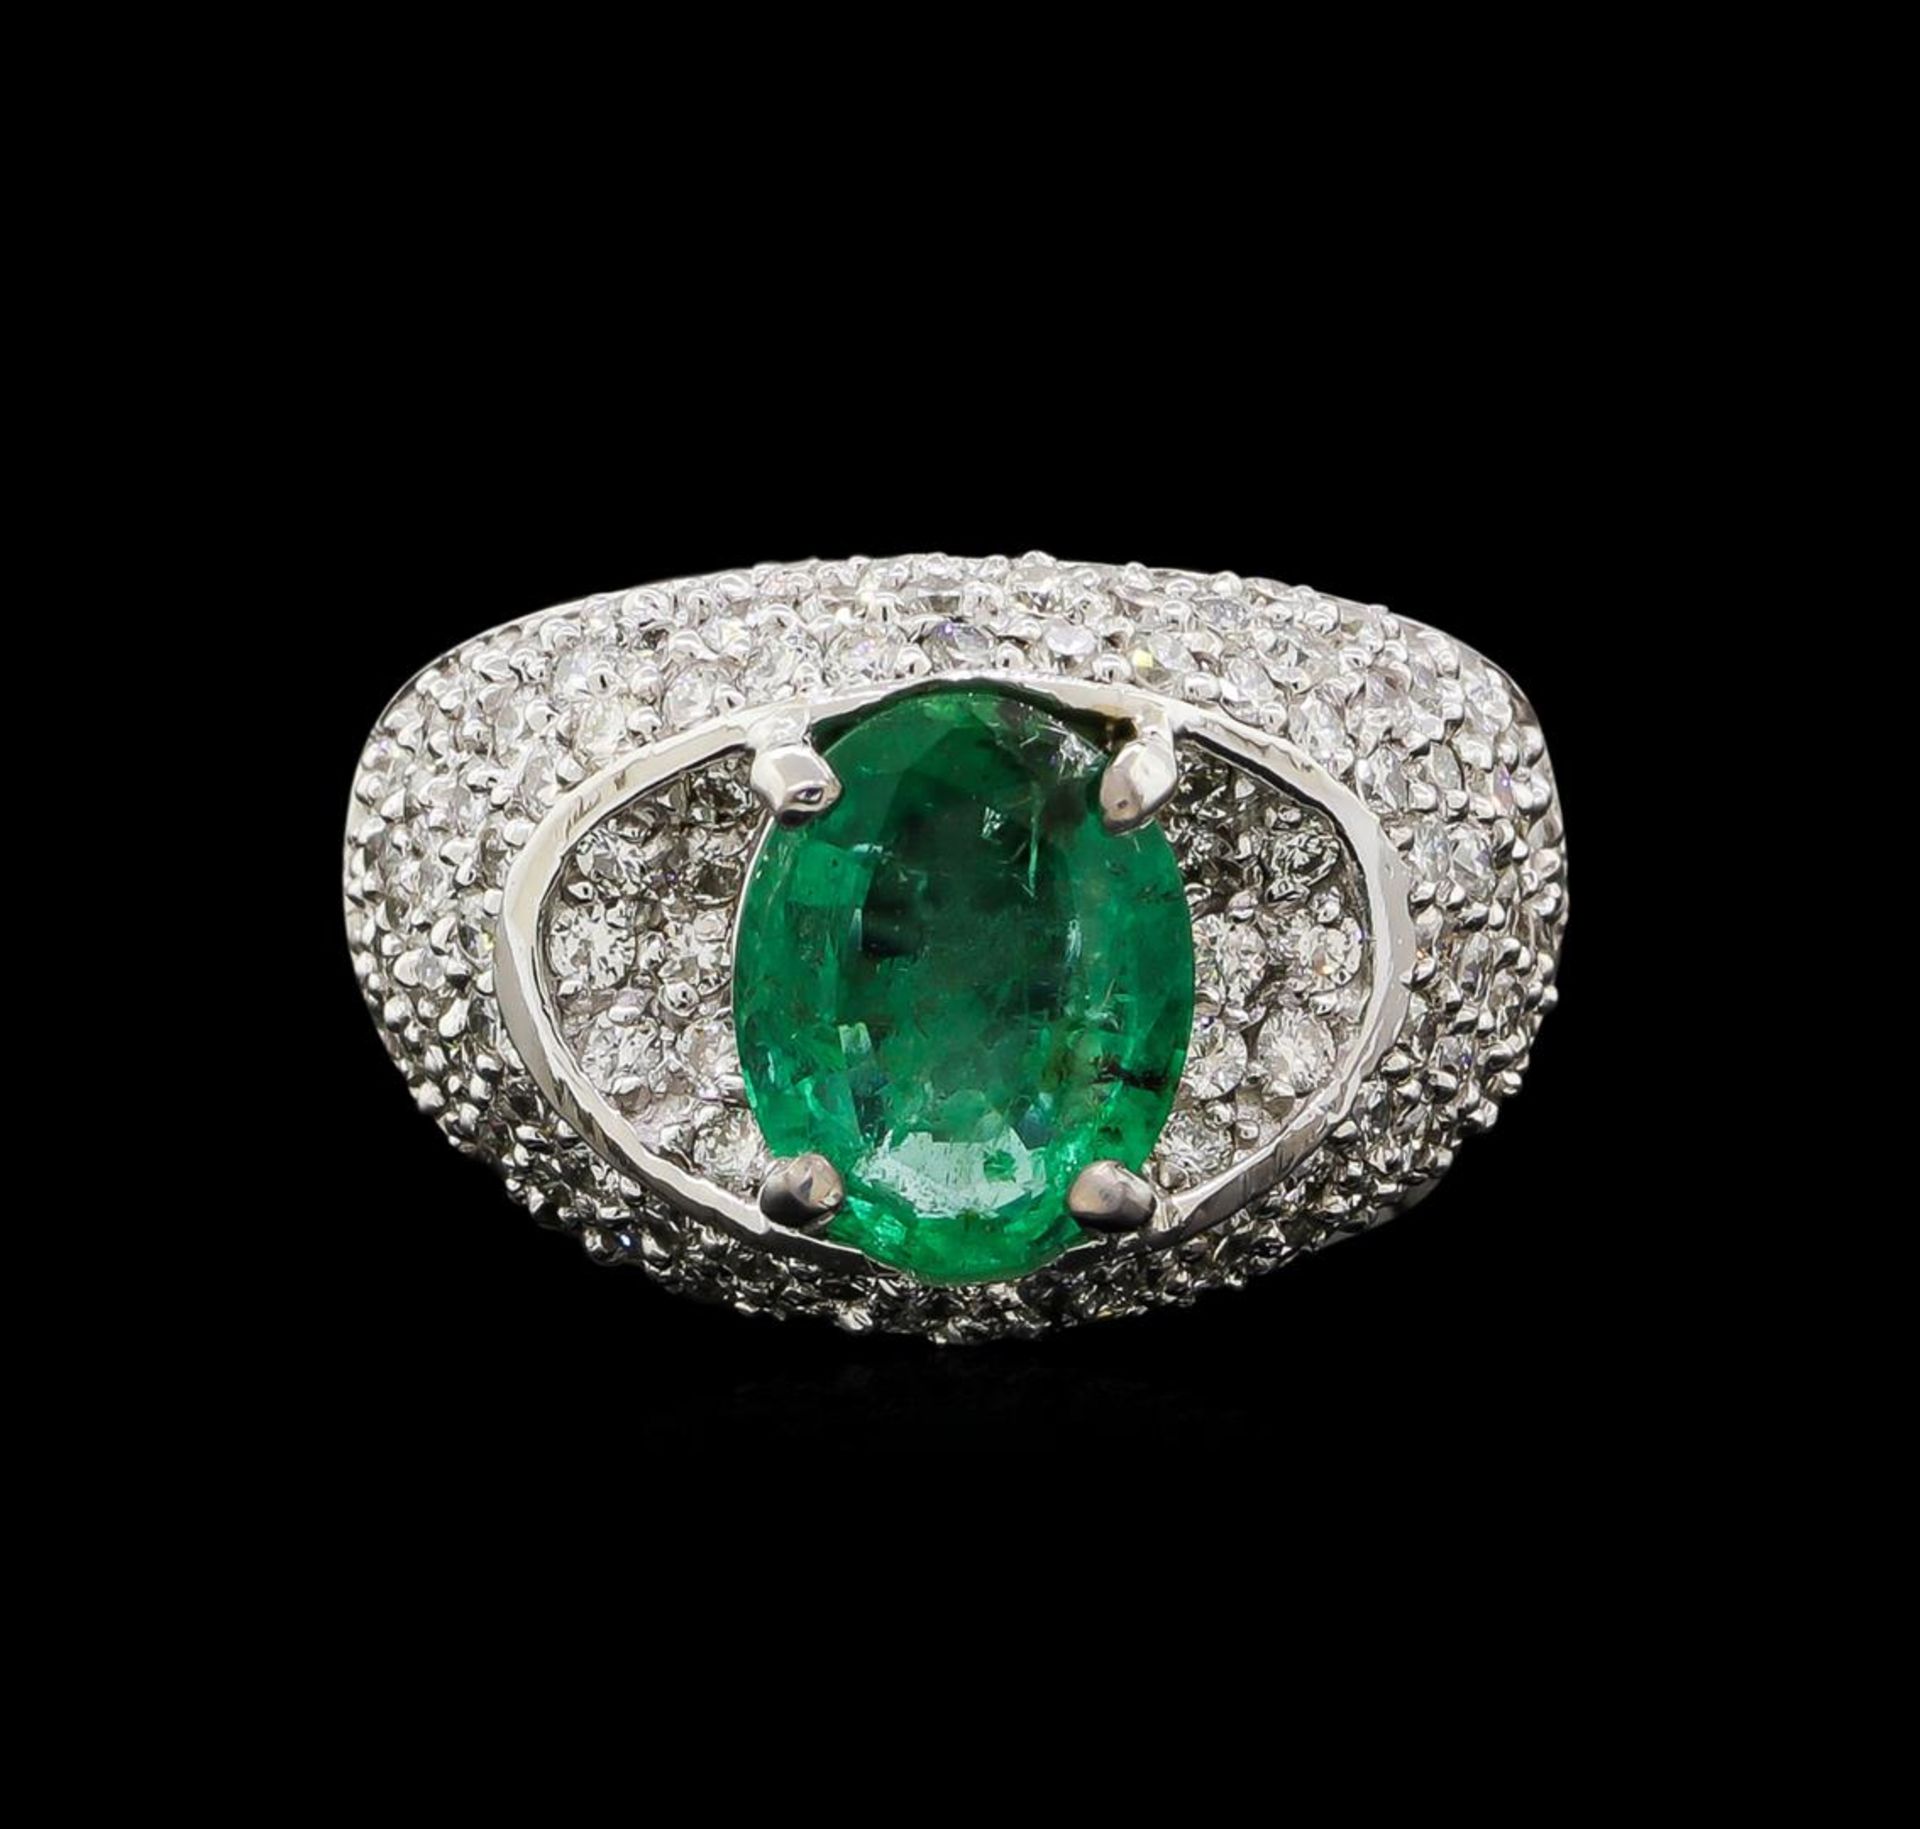 14KT White Gold 2.50 ctw Emerald and Diamond Ring - Image 2 of 5